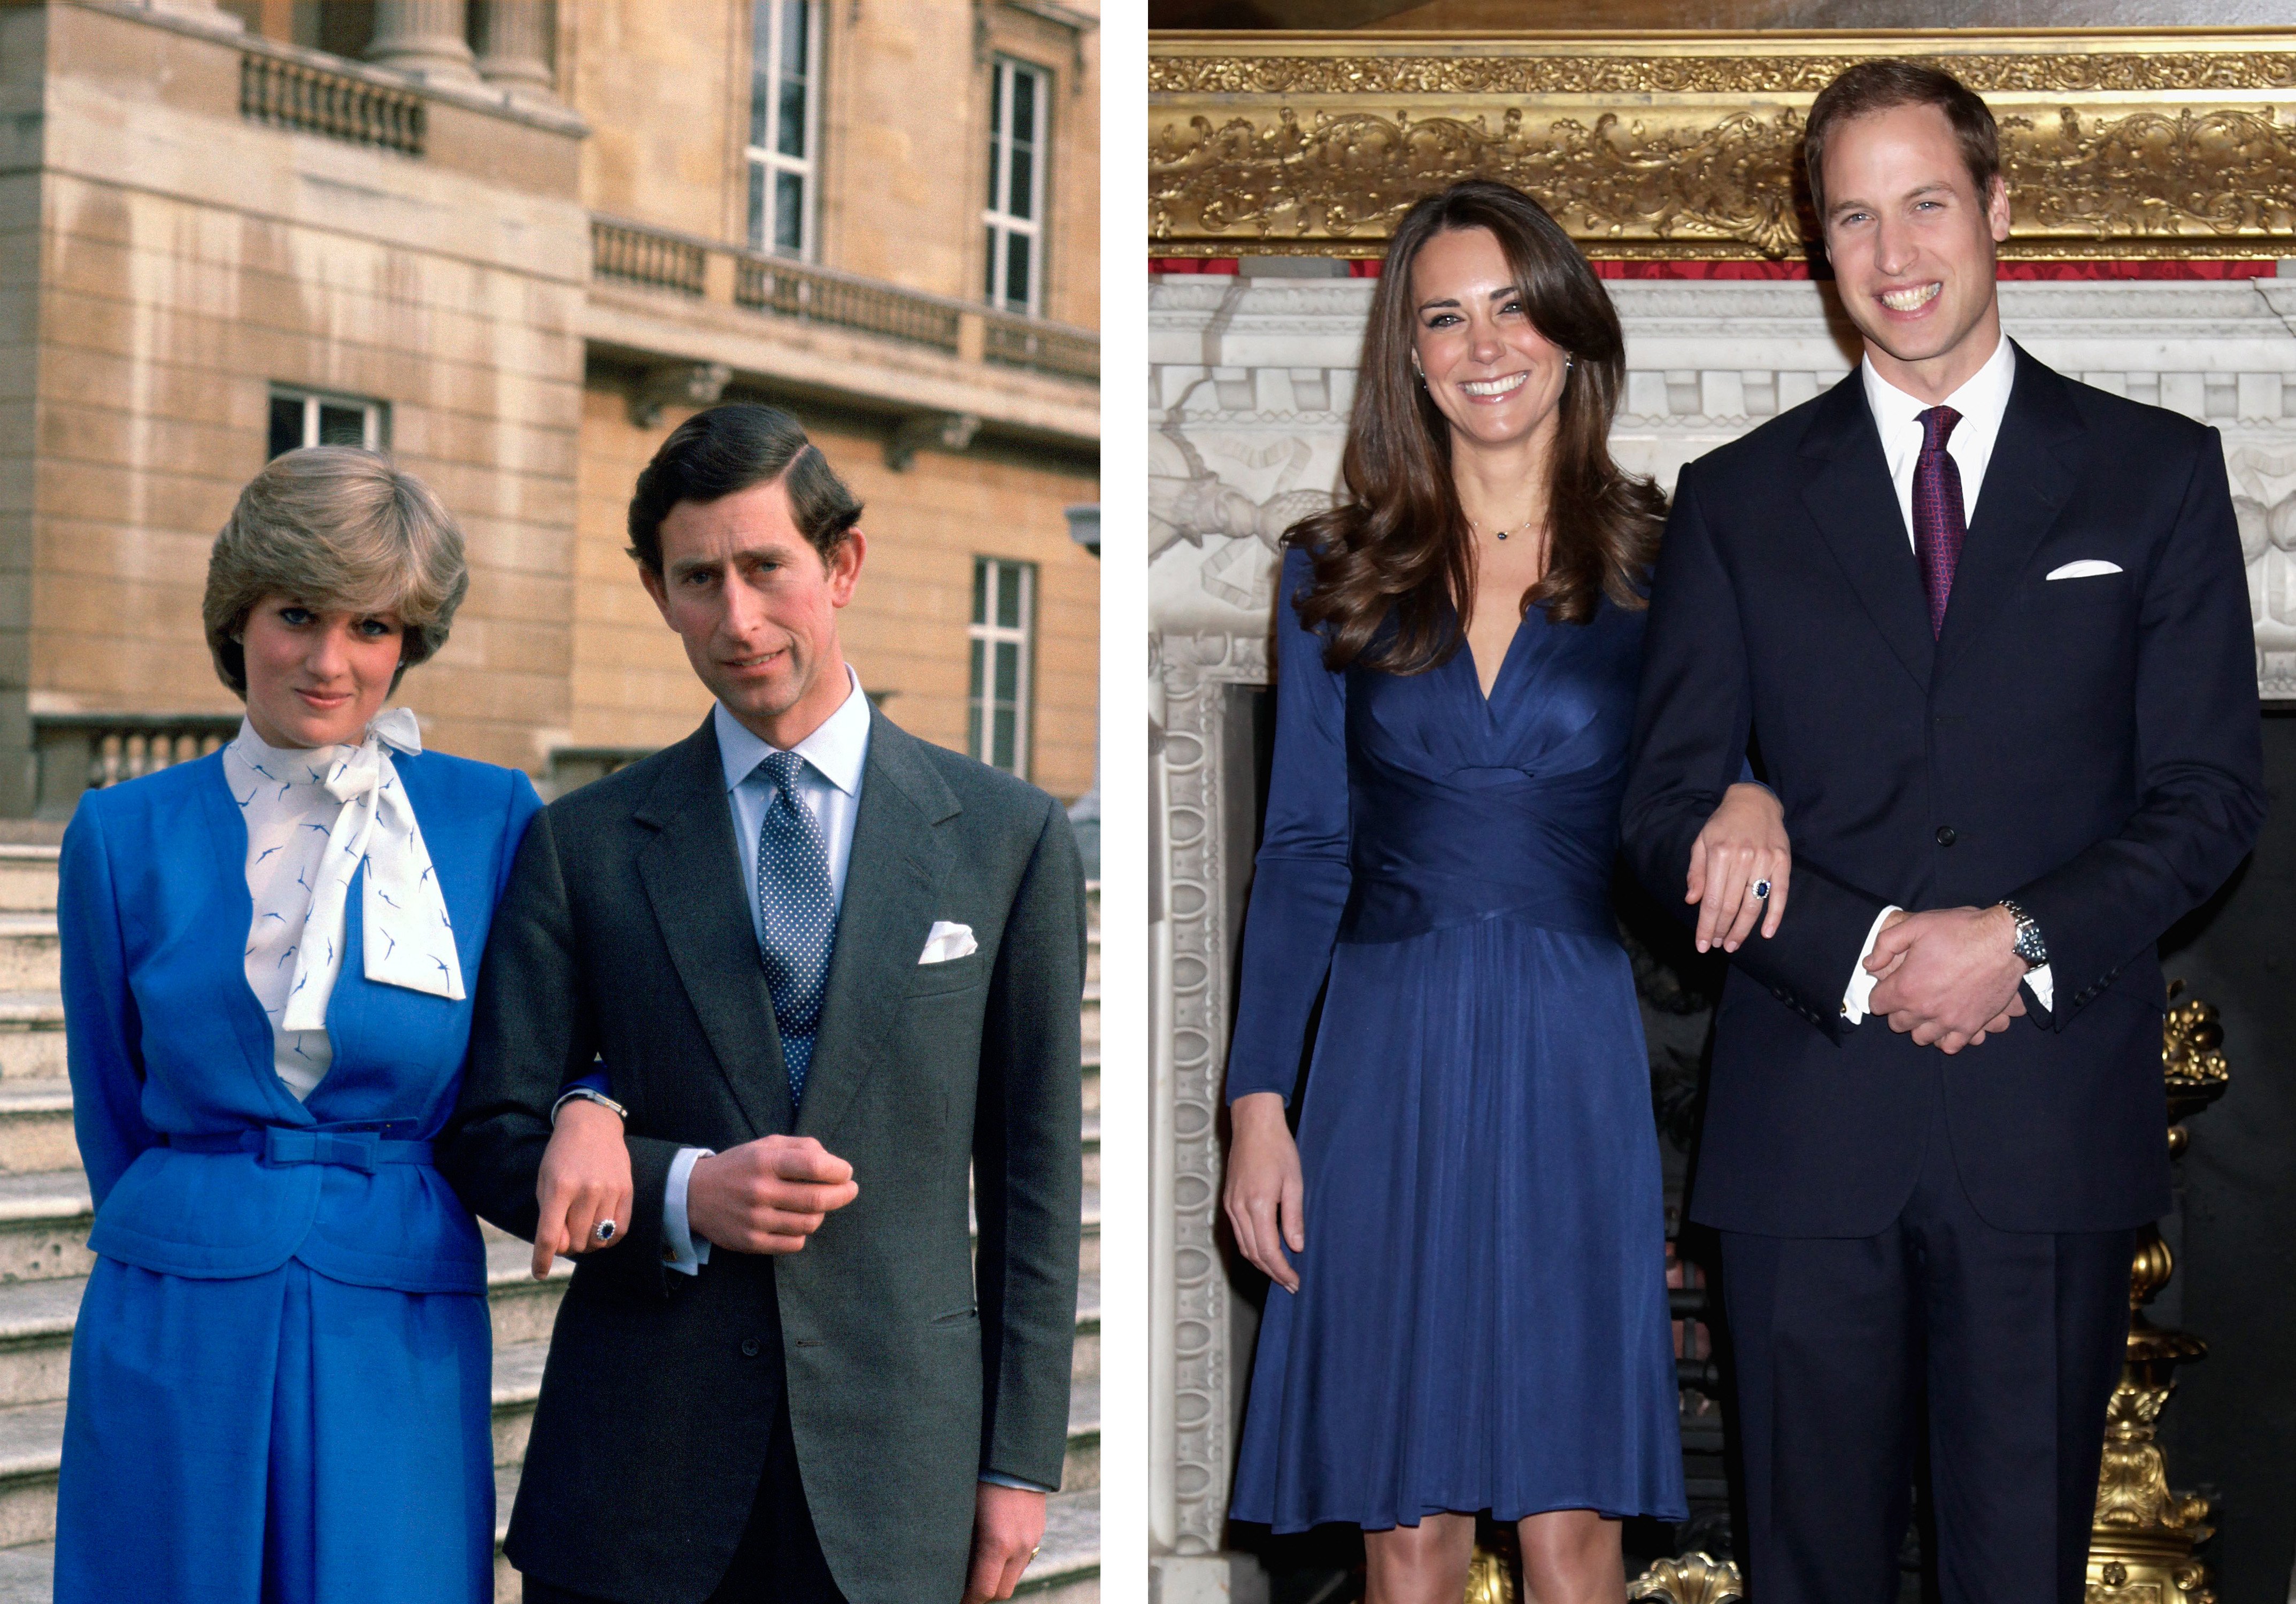 King Charles Arm-in-arm With His Fiance, Lady Diana Spencer after announcing their engagement [Left]. Prince William and Kate Middleton after their engagement [Right] | Source: Getty Images